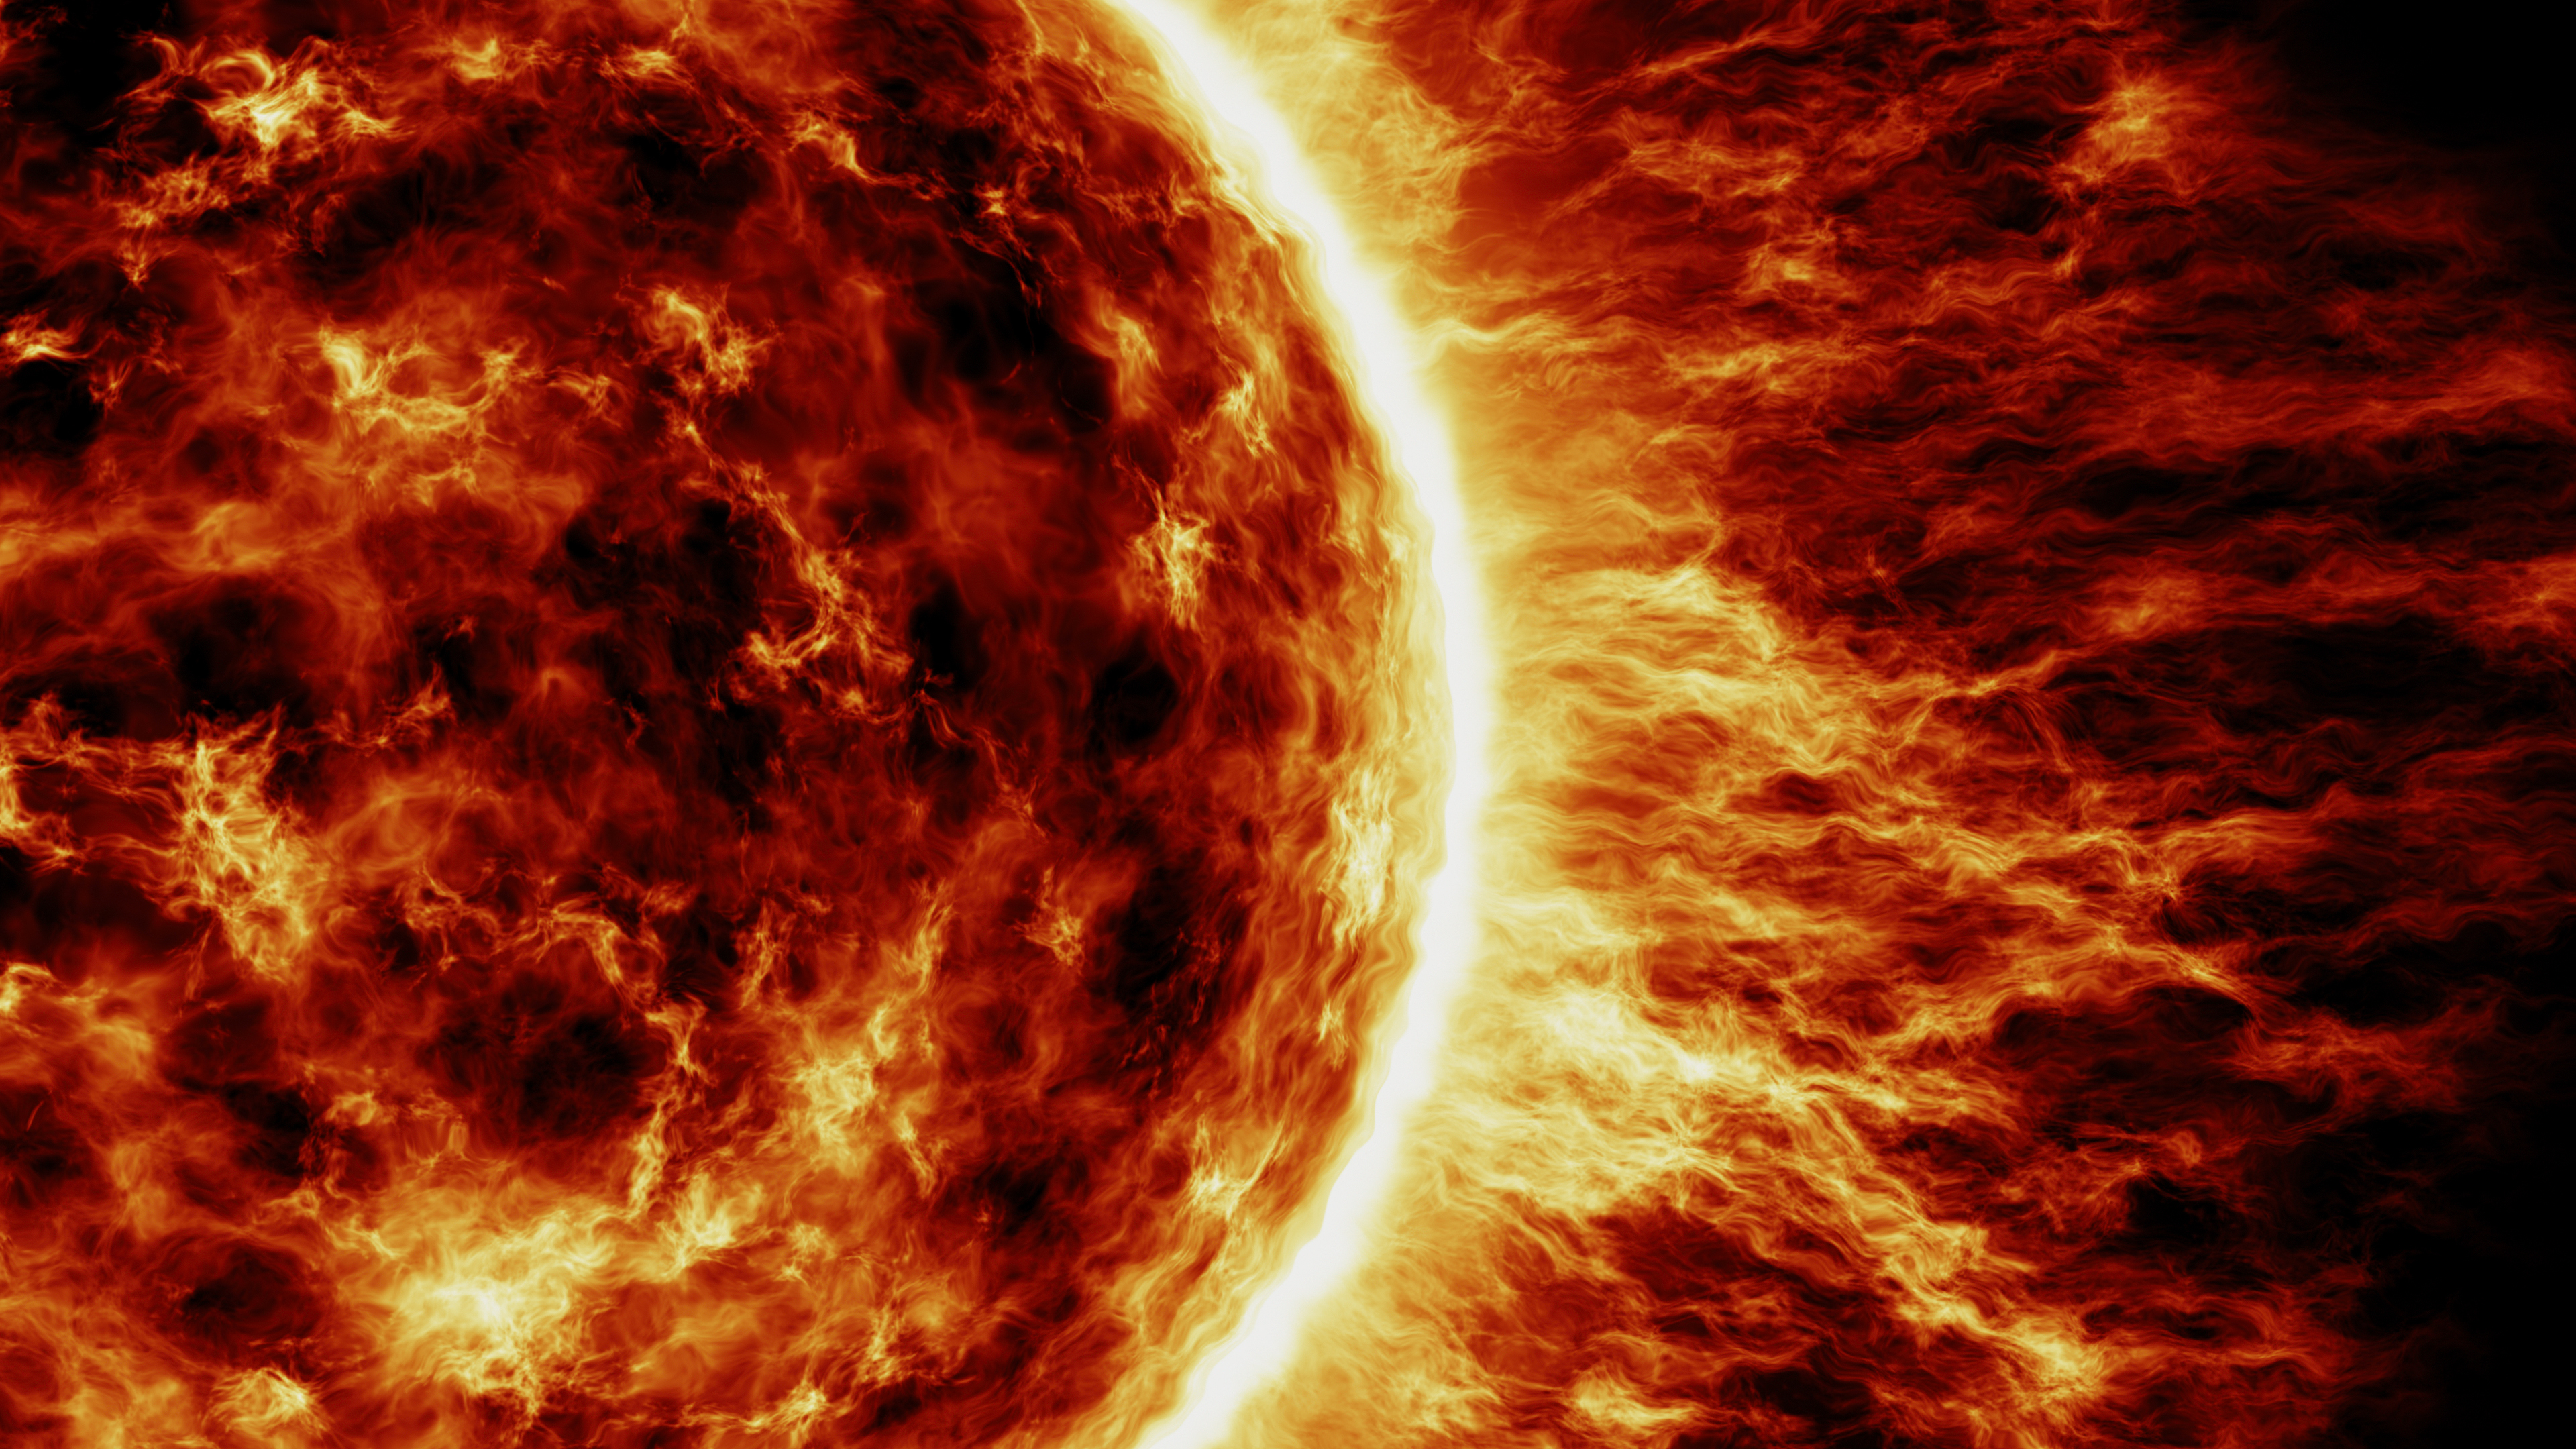 Solar flares: What are they and how do they affect Earth?